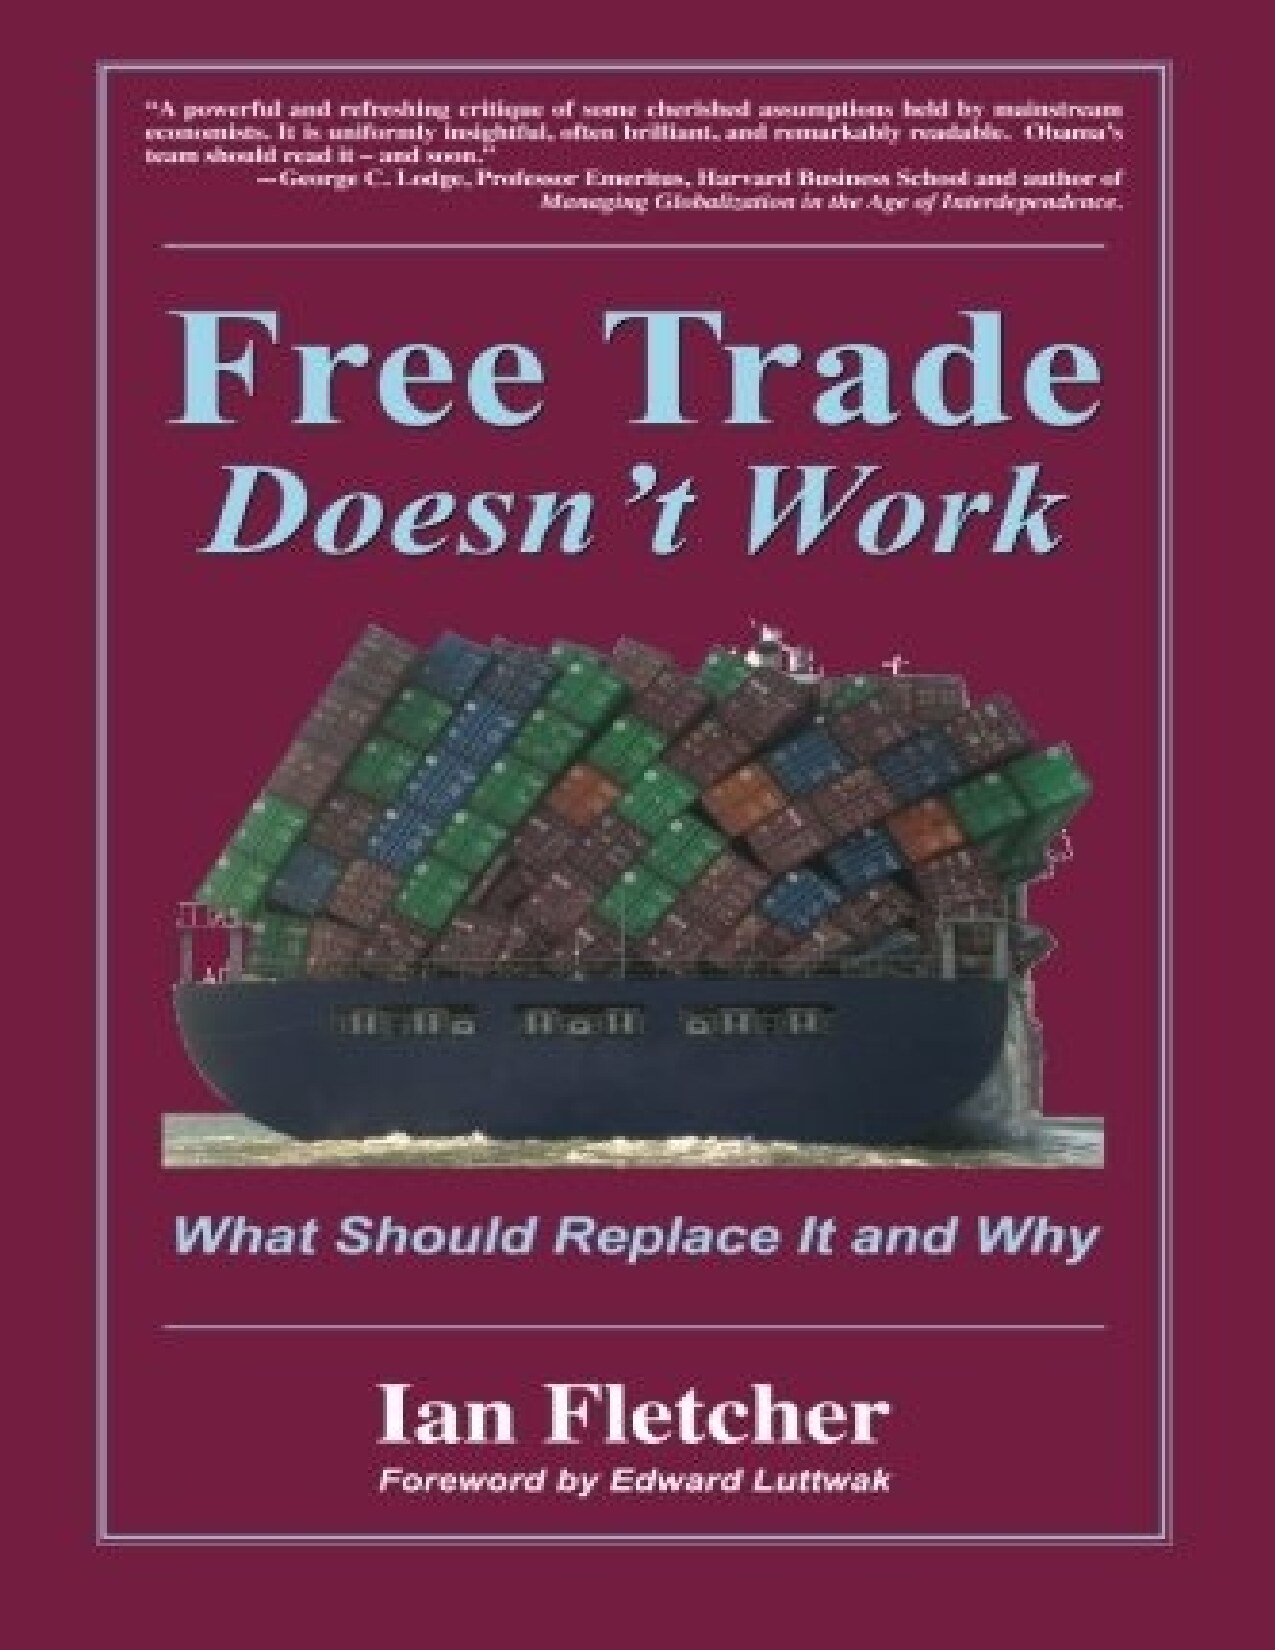 Free Trade Doesn't Work: What Should Replace It and Why